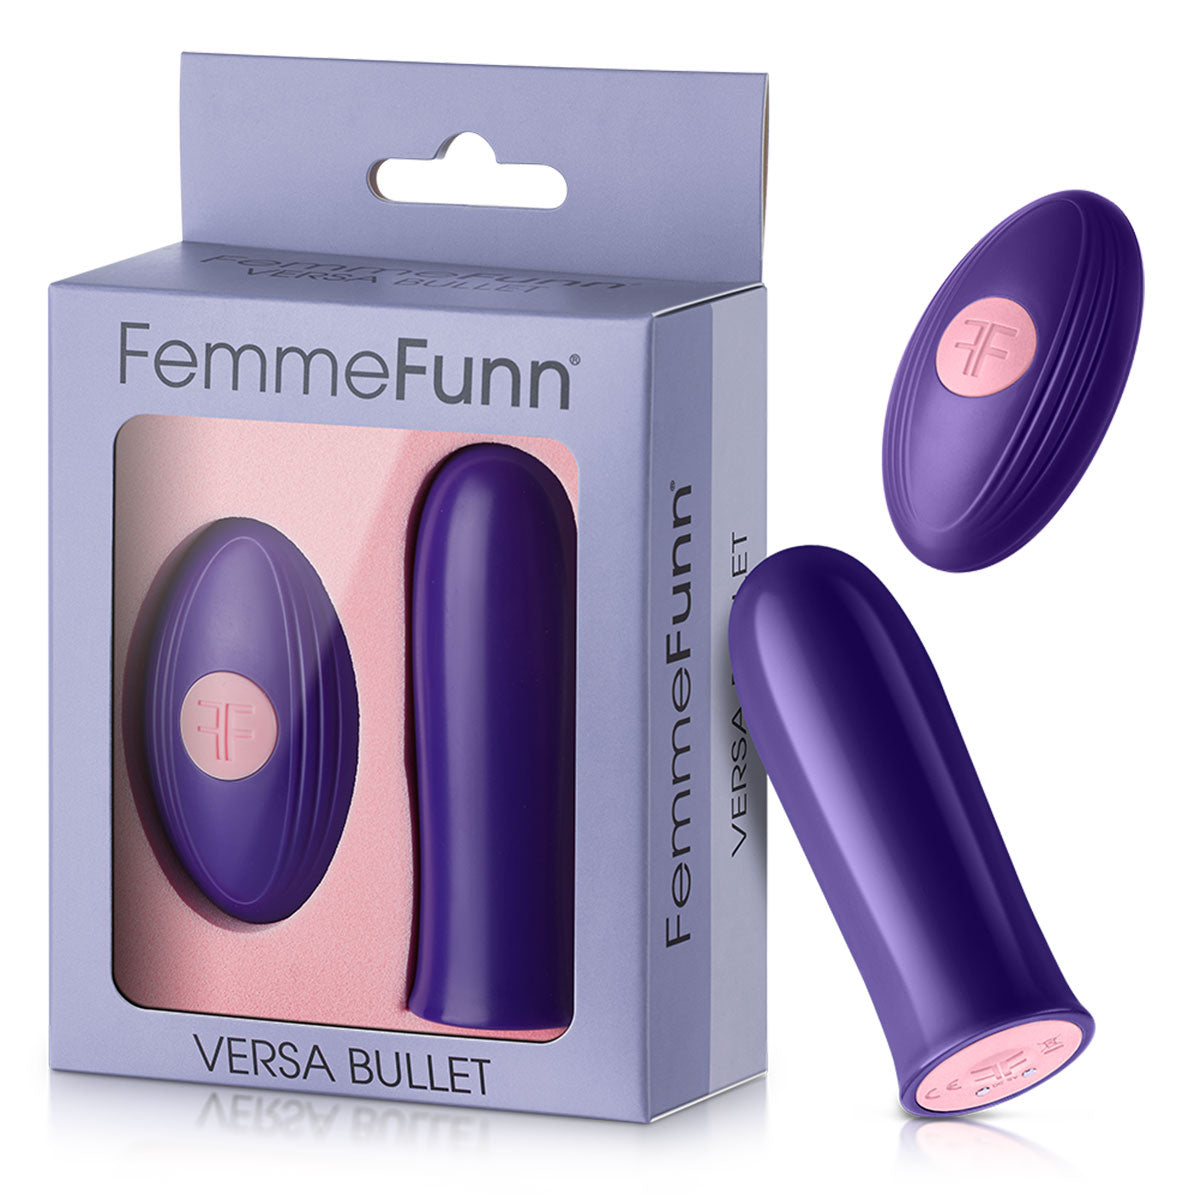 Femme Funn Versa Bullet and Remote - Purple Intimates Adult Boutique